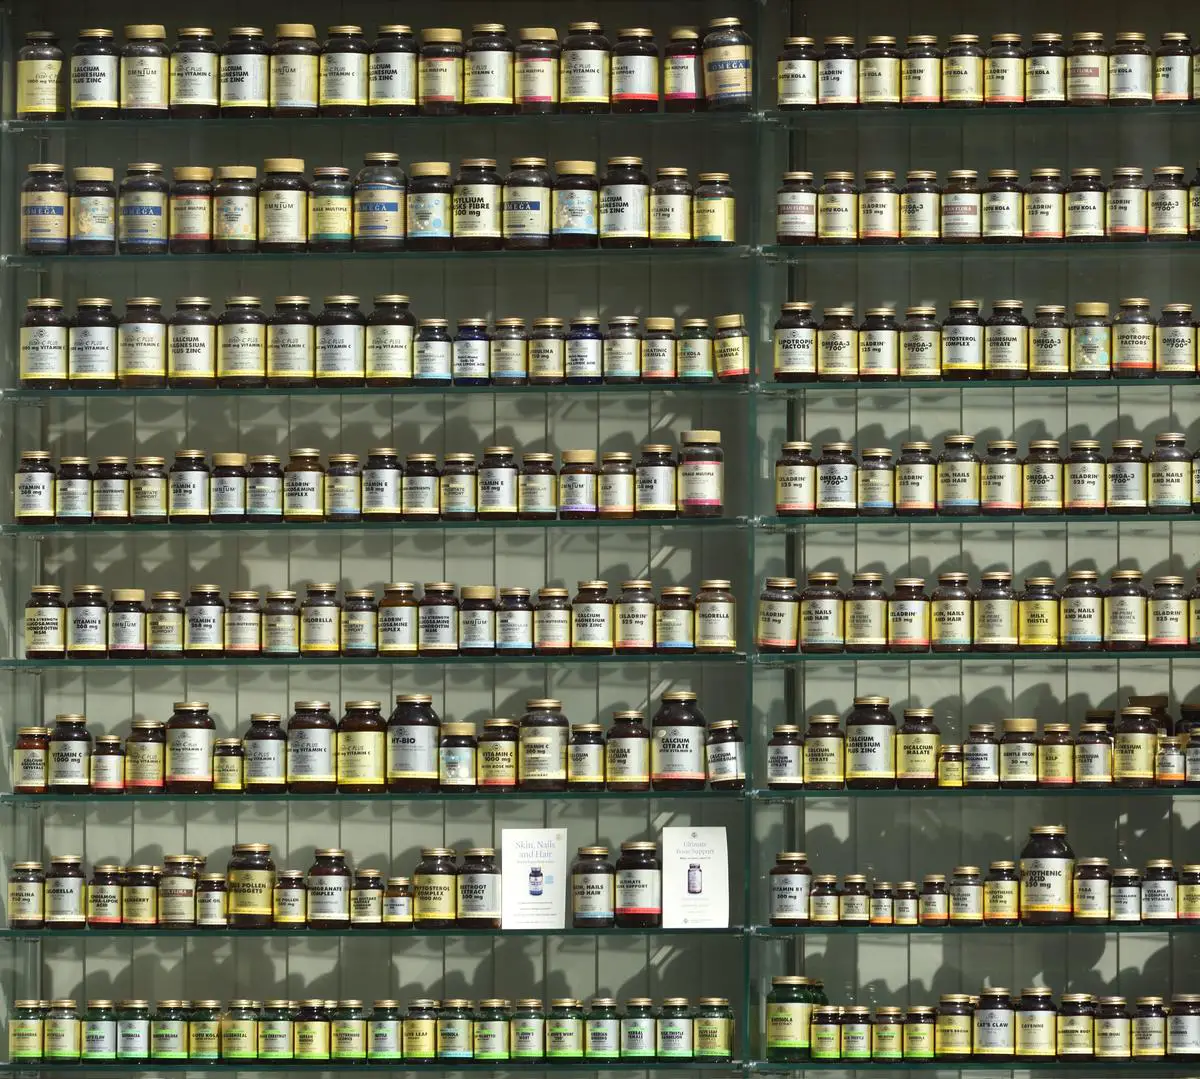 Image of a pharmacy shelf with medicine bottles, representing Costco Pharmacy's pricing overview.